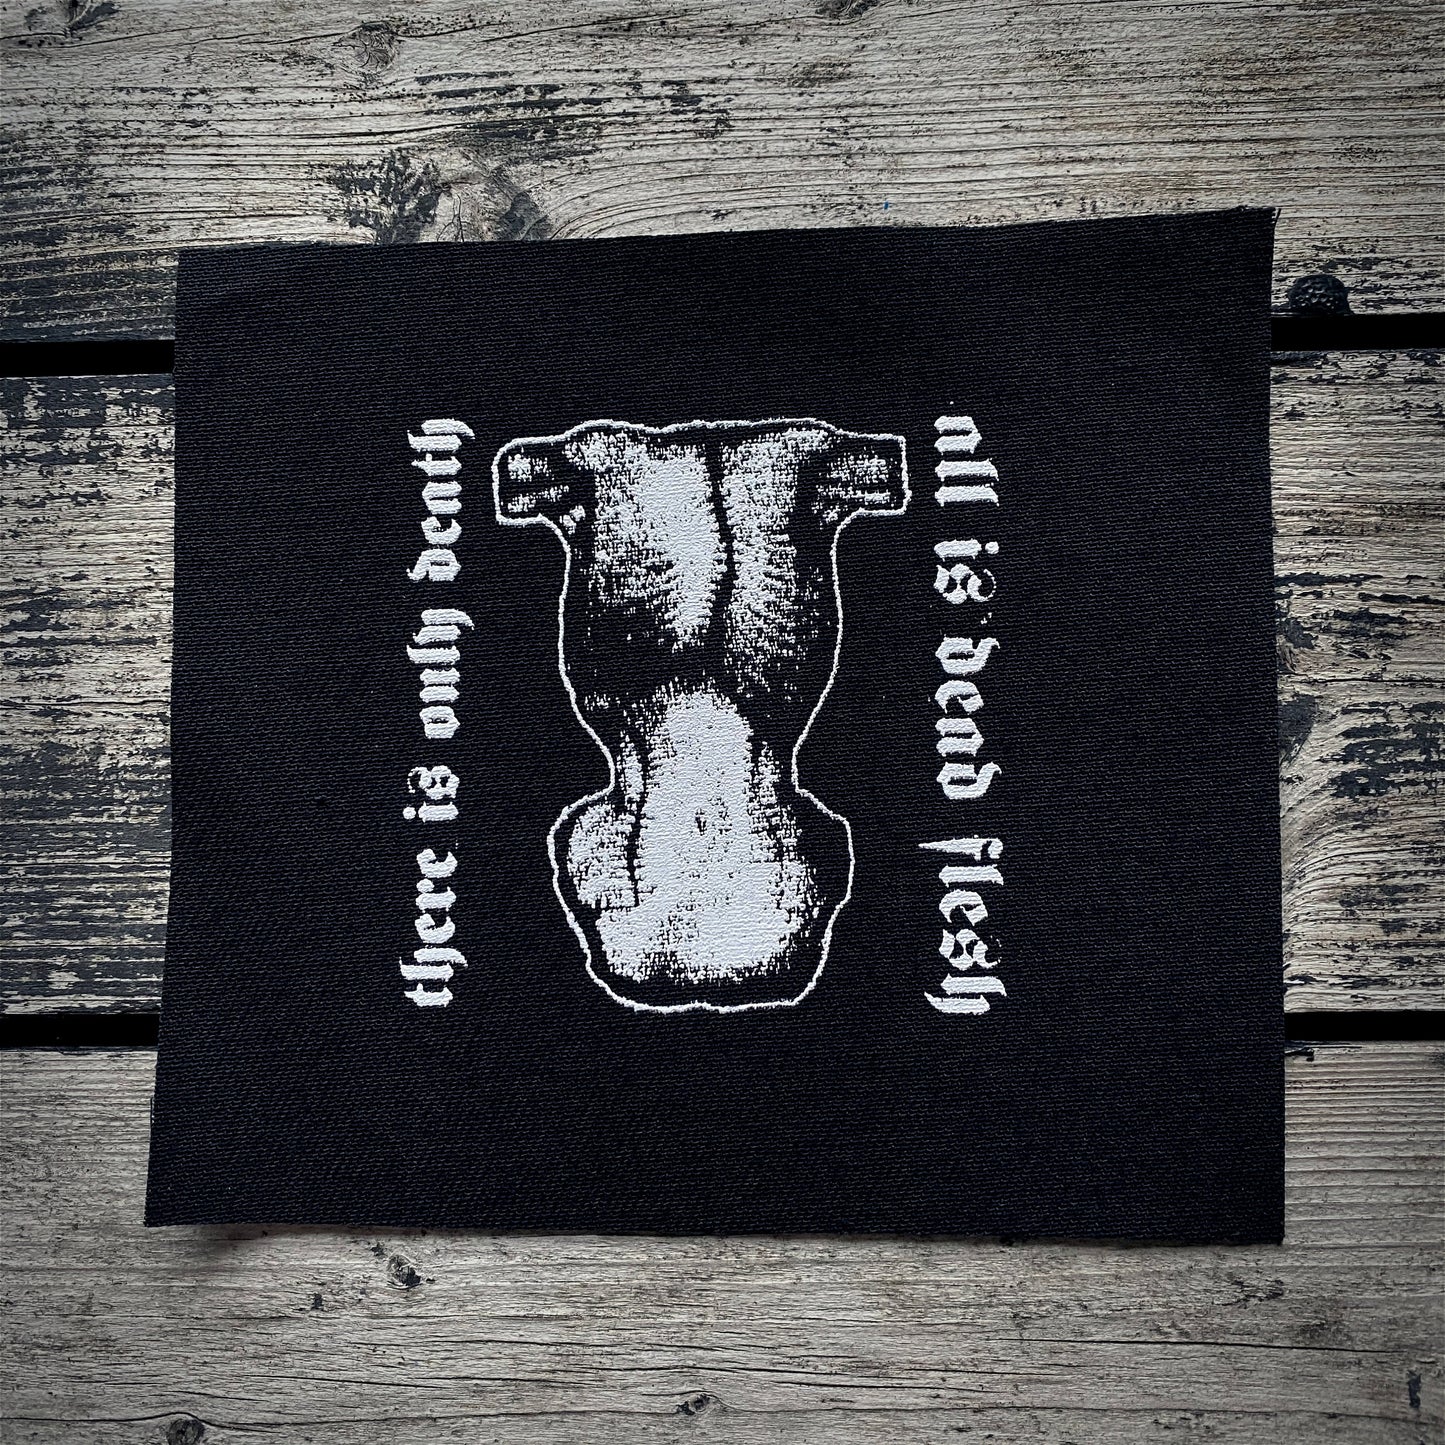 There is only death, all is dead flesh, autopsy torso  - screen printed PATCH